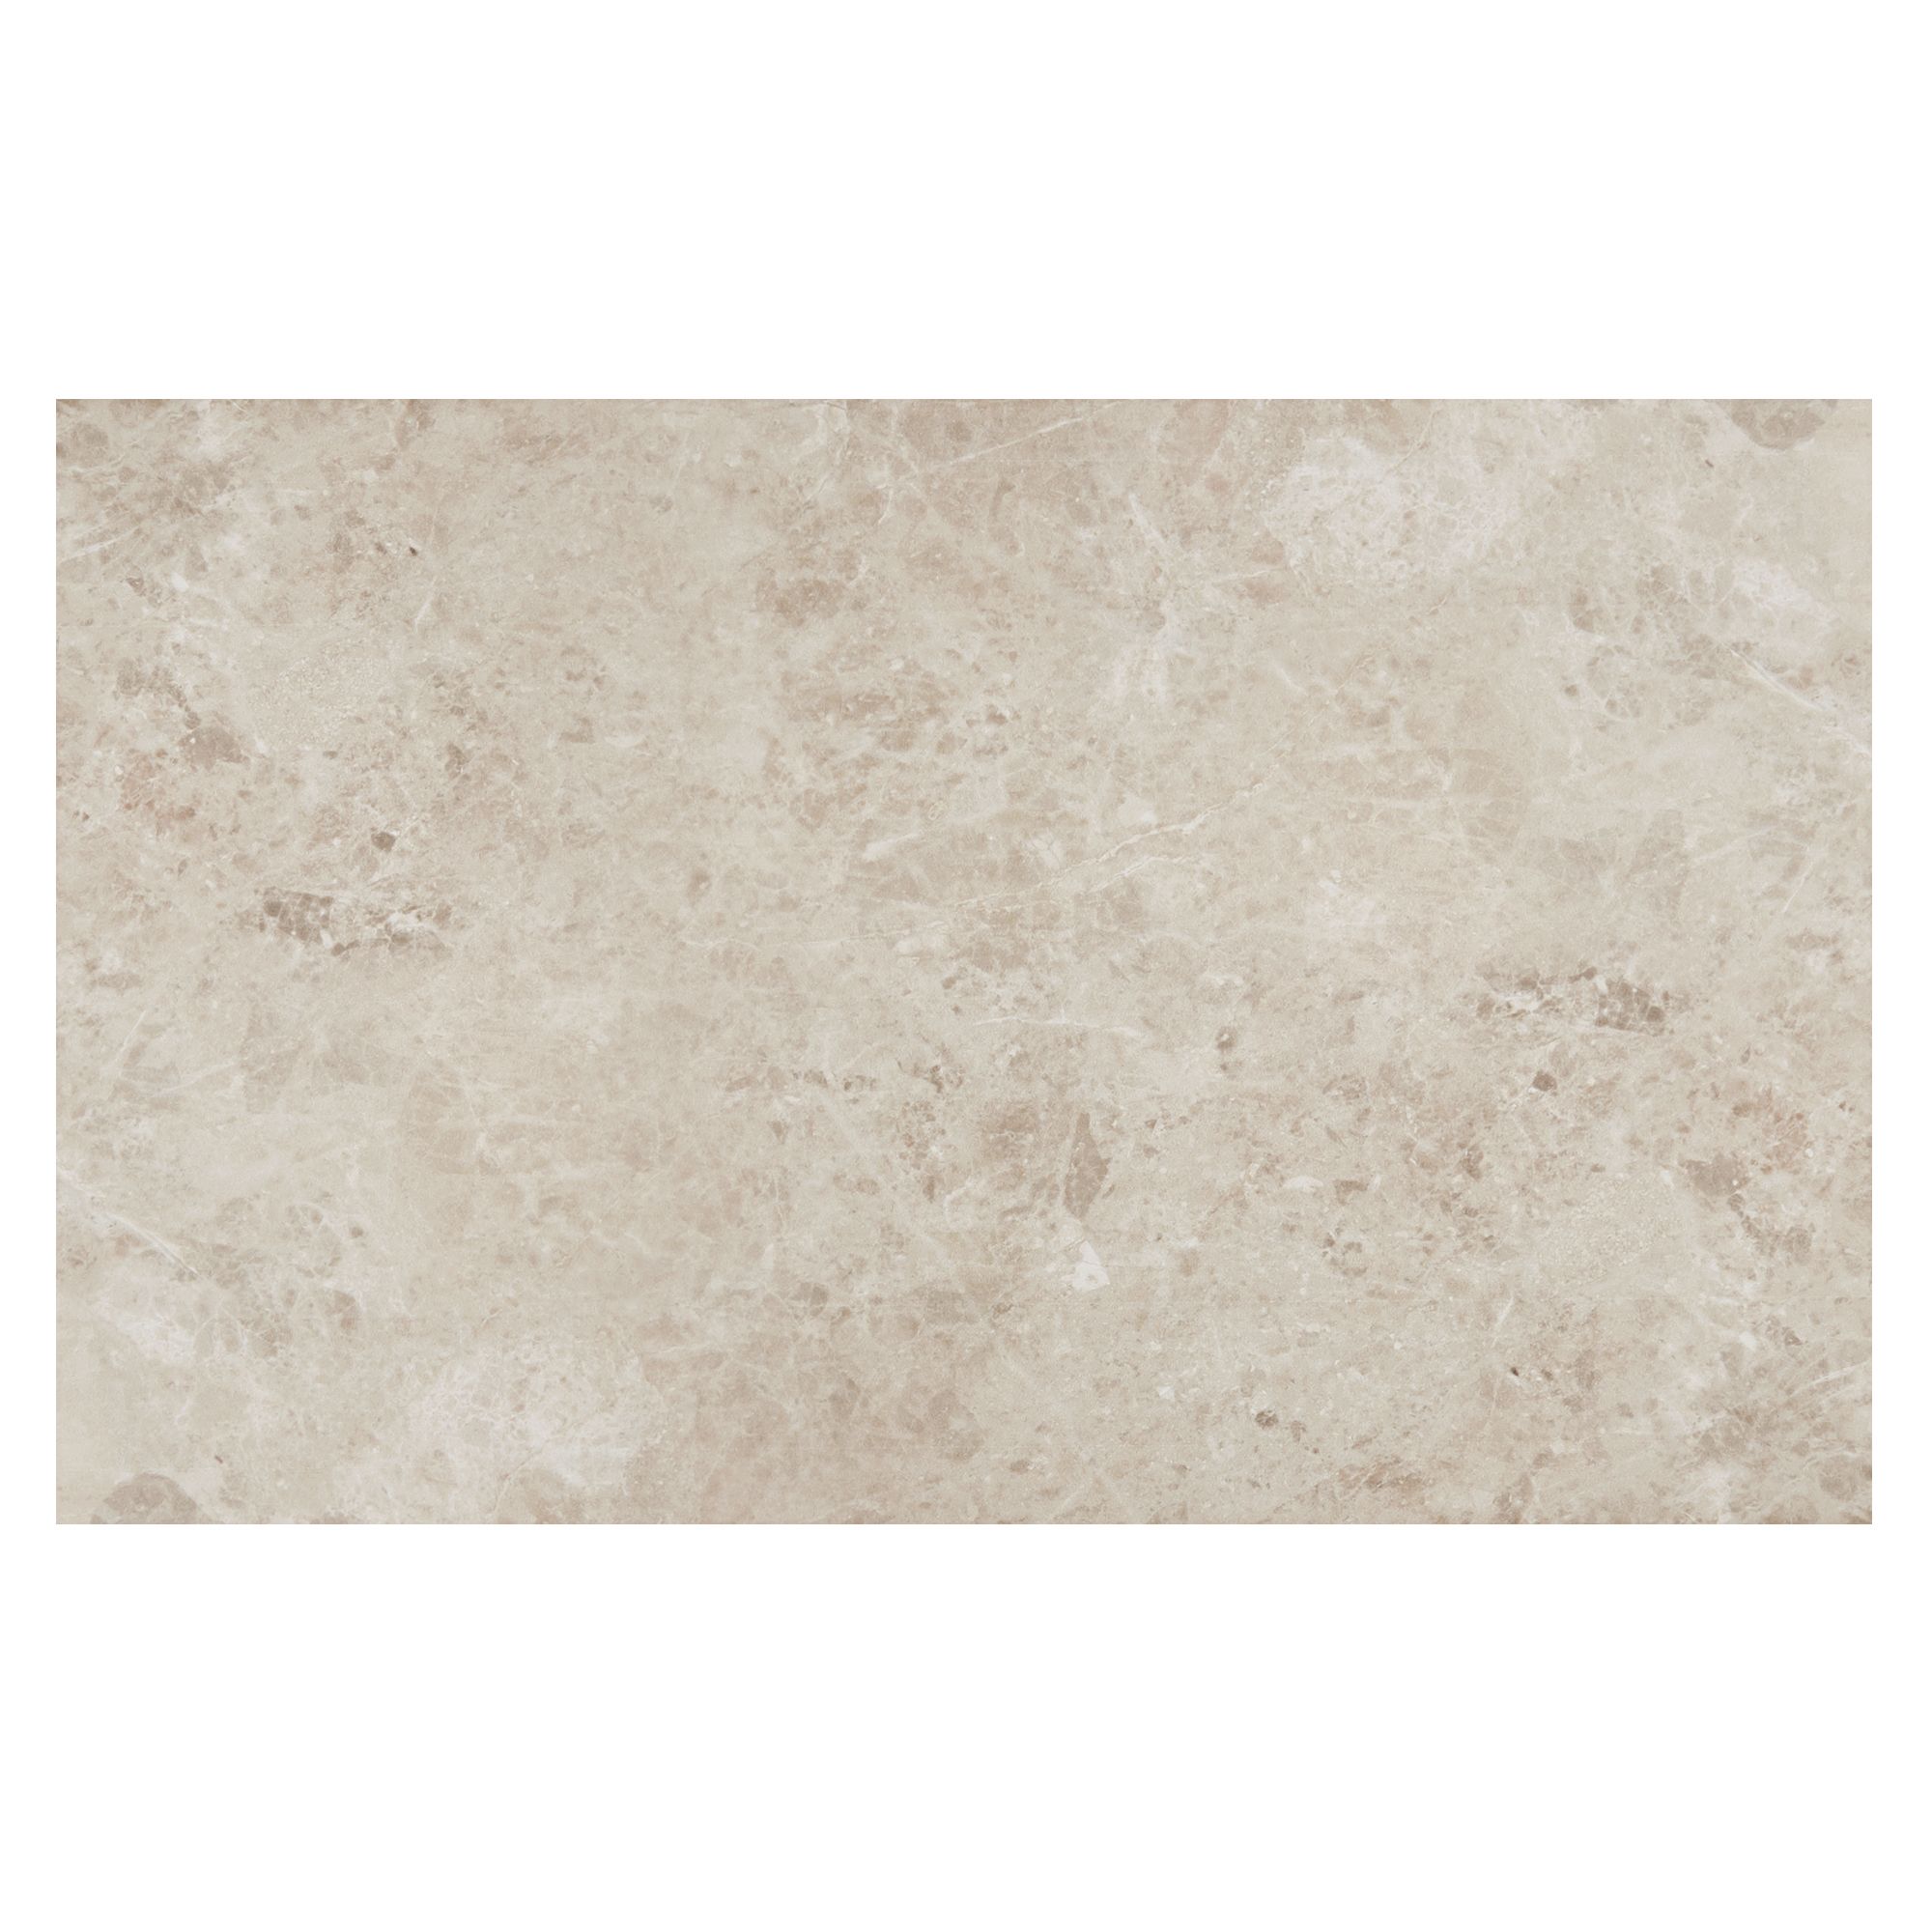 Commo Beige Gloss Flat Ceramic Indoor Wall Tile, Pack of 10, (L)402.4mm (W)251.6mm